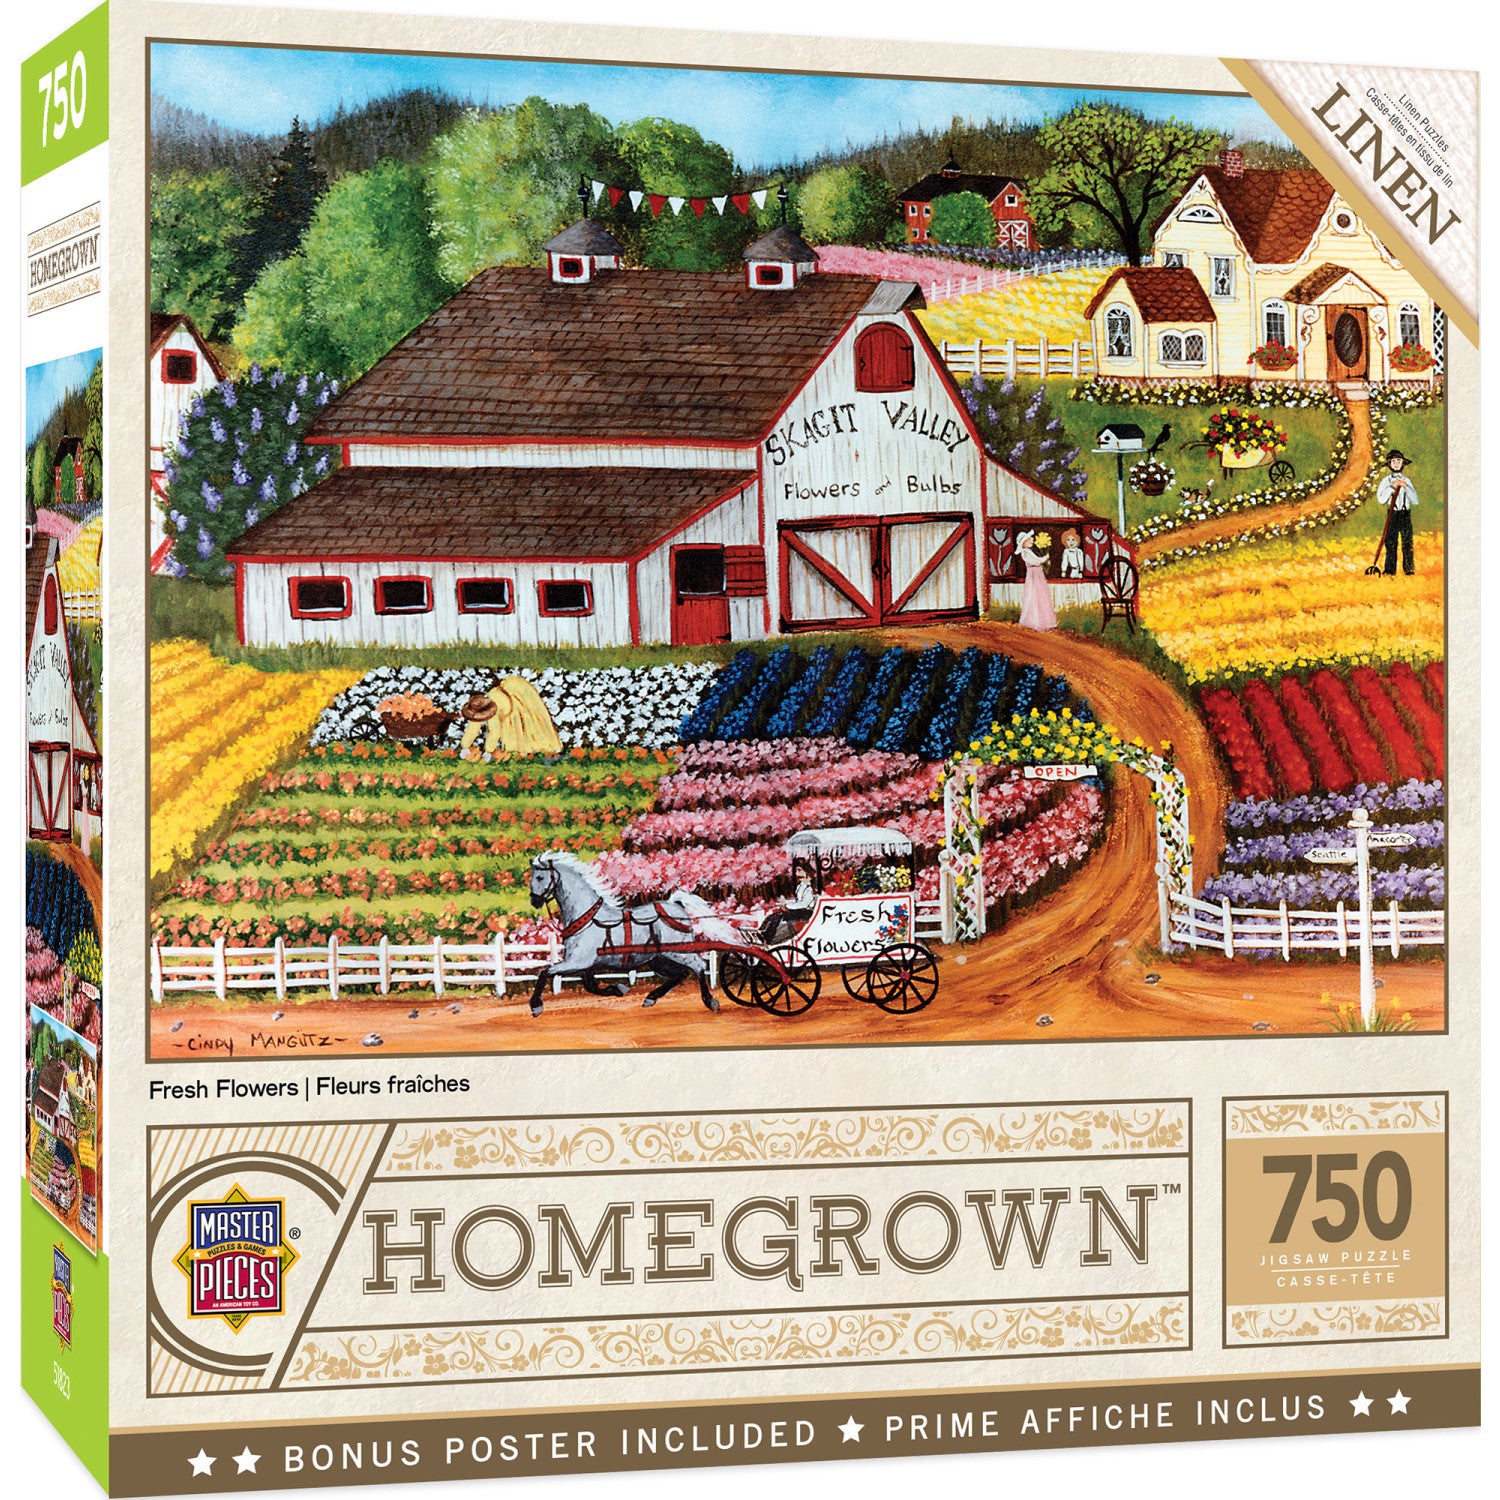 Homegrown - Fresh Flowers 750 Piece Puzzle